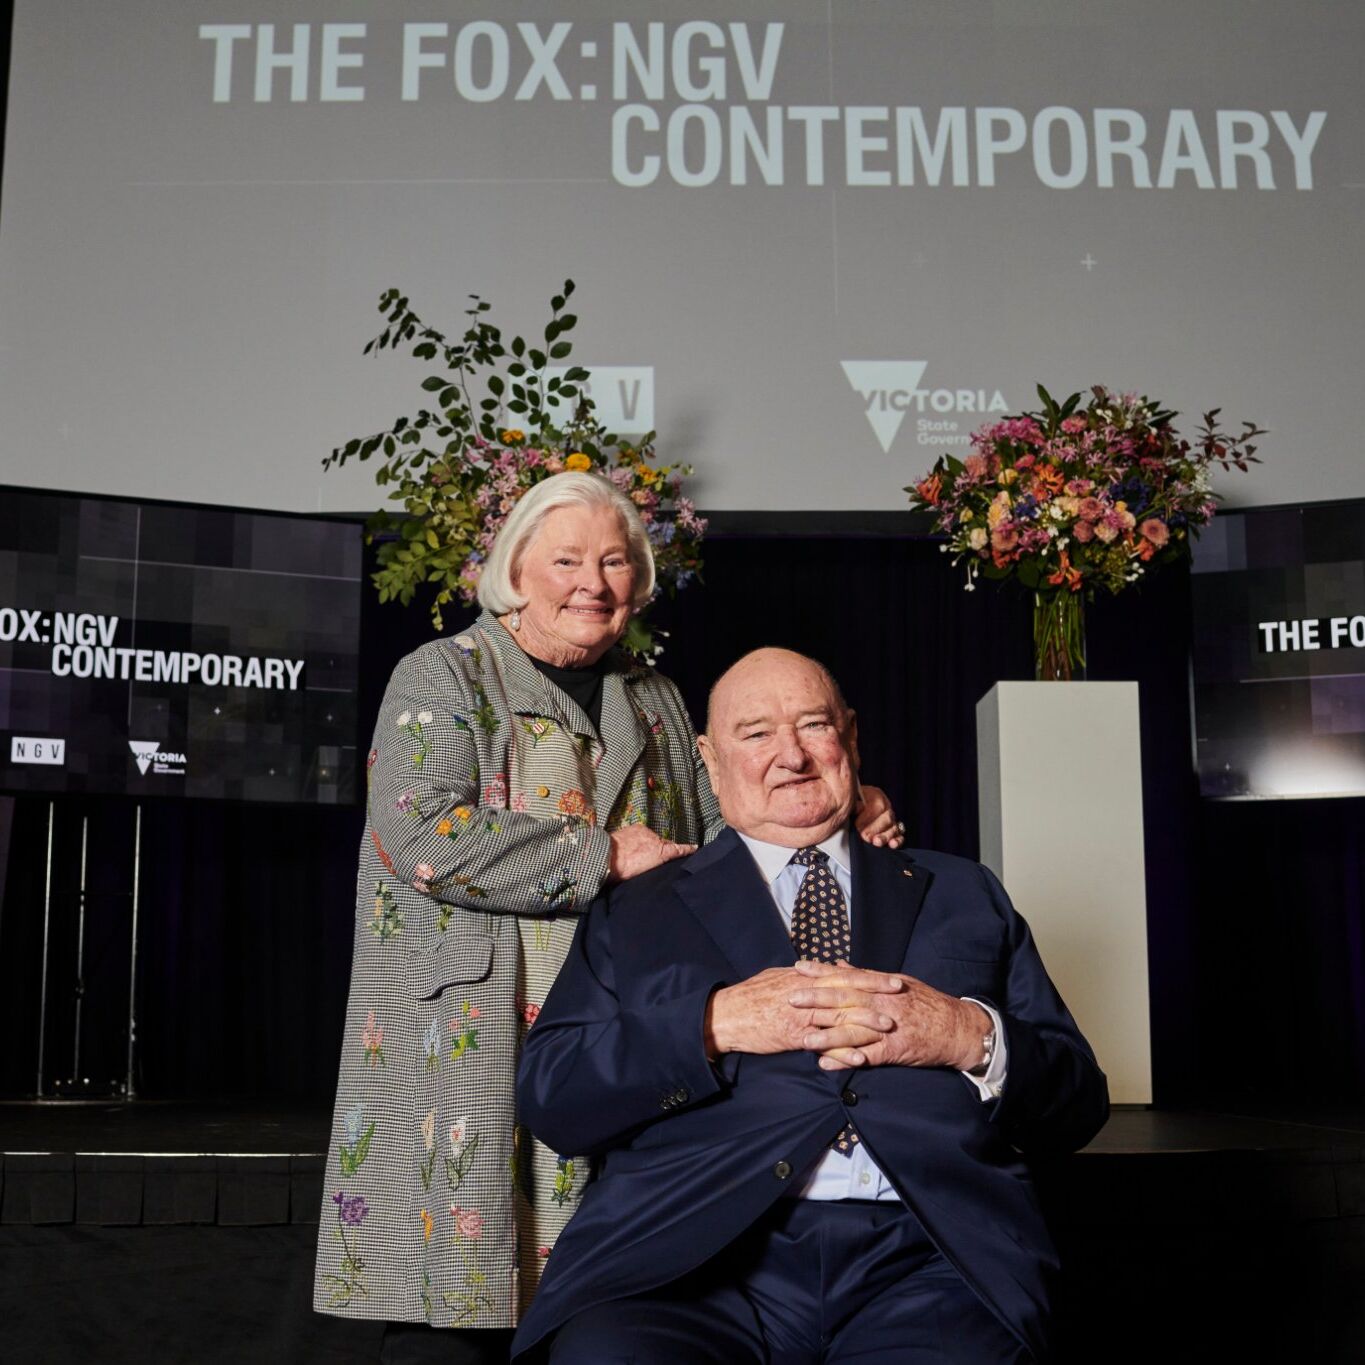 A seated man in a dark grey suit and a woman standing with her hands on the mans shoulder, she is wearing a grey jacket with a floral design. They stand in a dark auditorium with the words The Fox: NGV Contemporary on three screens in the background.